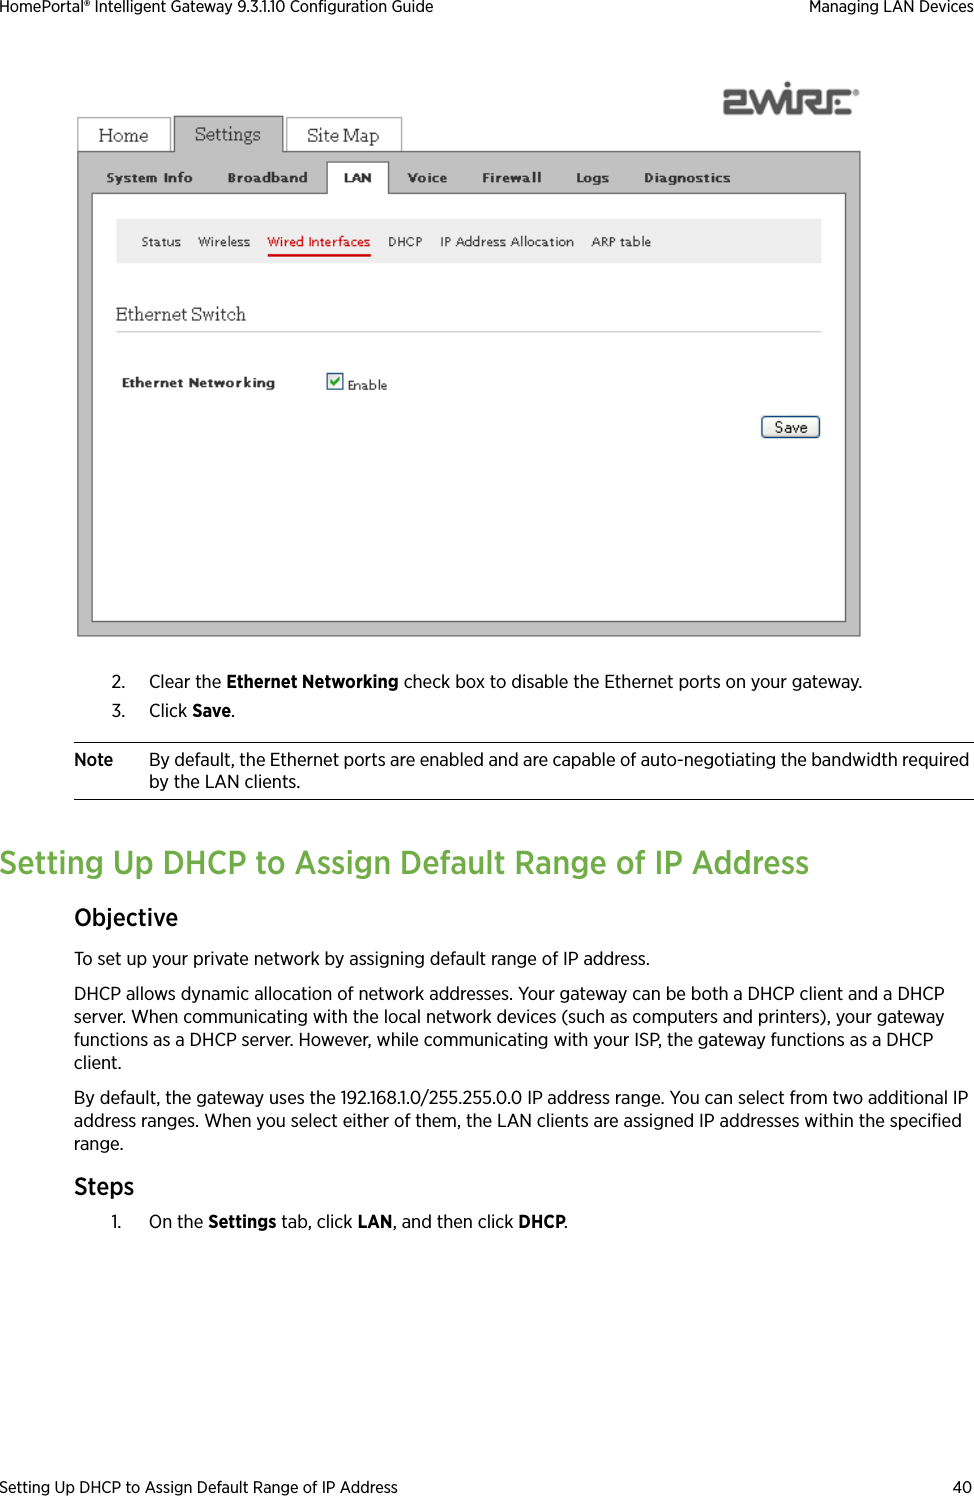 Setting Up DHCP to Assign Default Range of IP Address 40HomePortal® Intelligent Gateway 9.3.1.10 Configuration Guide Managing LAN Devices2. Clear the Ethernet Networking check box to disable the Ethernet ports on your gateway.3. Click Save. Note By default, the Ethernet ports are enabled and are capable of auto-negotiating the bandwidth required by the LAN clients.Setting Up DHCP to Assign Default Range of IP AddressObjectiveTo set up your private network by assigning default range of IP address.DHCP allows dynamic allocation of network addresses. Your gateway can be both a DHCP client and a DHCP server. When communicating with the local network devices (such as computers and printers), your gateway functions as a DHCP server. However, while communicating with your ISP, the gateway functions as a DHCP client. By default, the gateway uses the 192.168.1.0/255.255.0.0 IP address range. You can select from two additional IP address ranges. When you select either of them, the LAN clients are assigned IP addresses within the specified range.Steps1. On the Settings tab, click LAN, and then click DHCP.